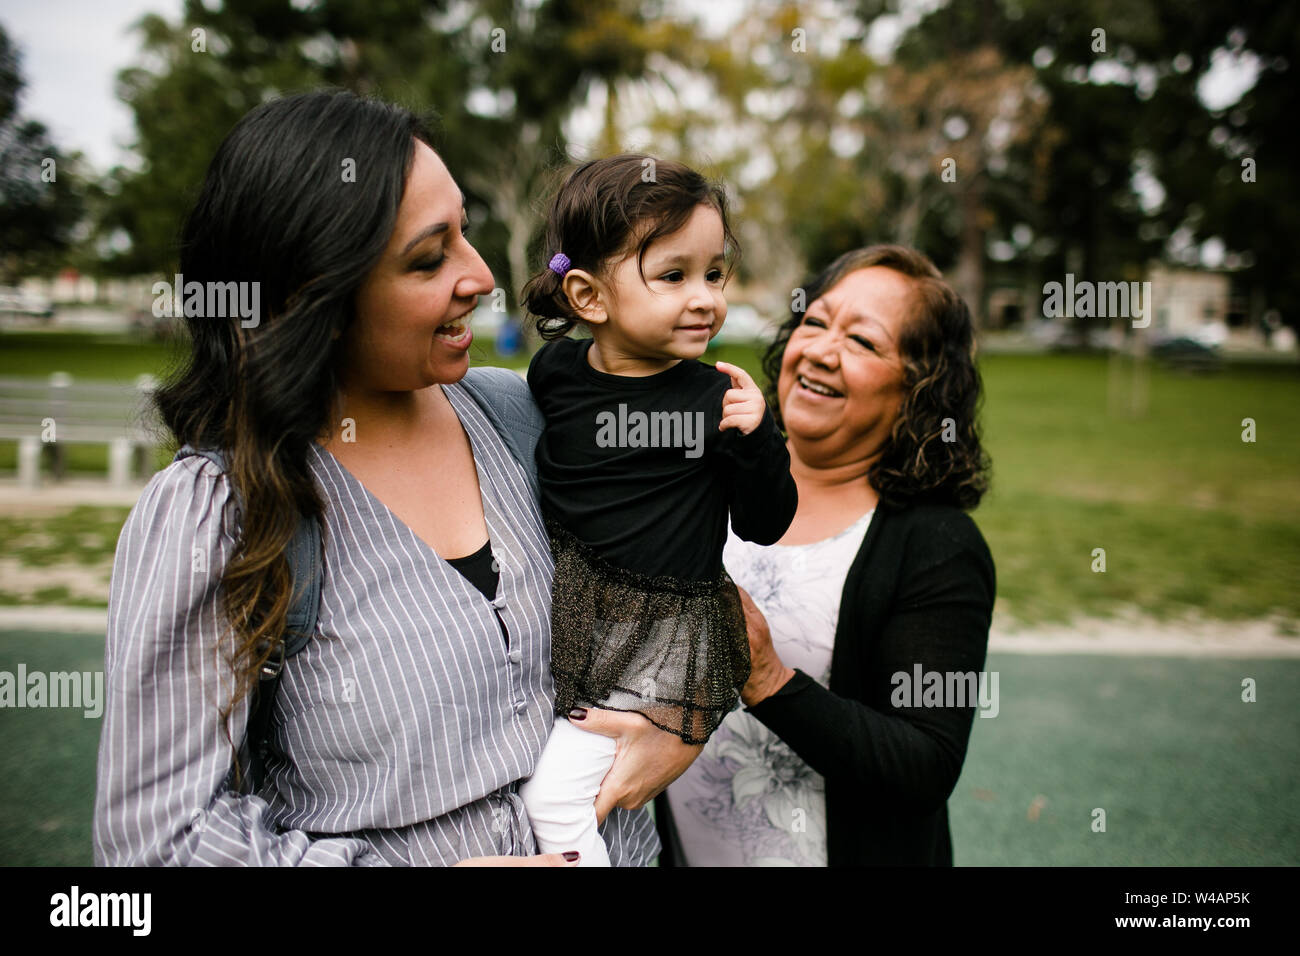 Mother holding daughter as grandmother looks on Stock Photo